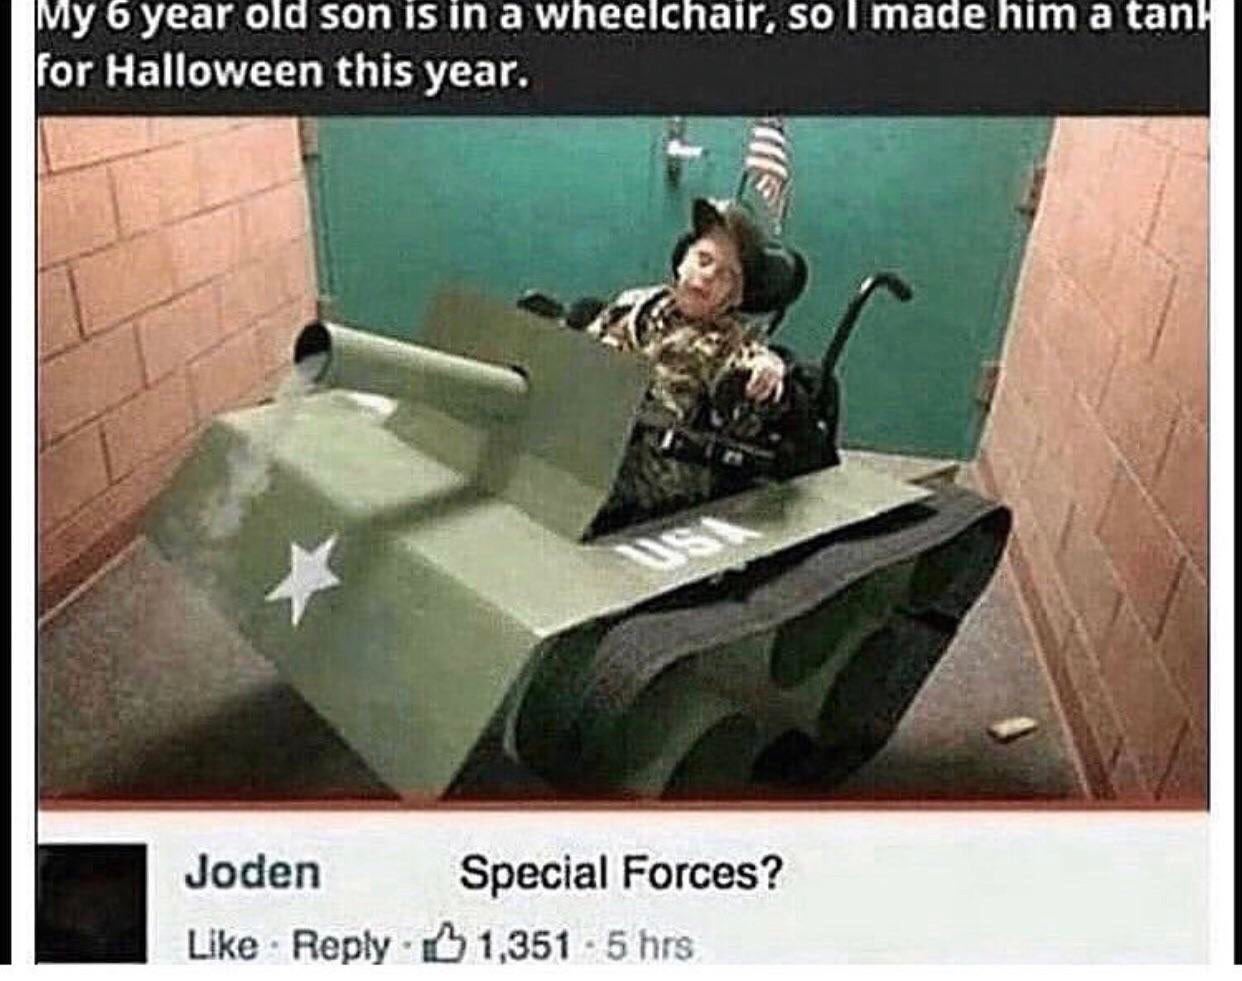 my 6 year old son - My 6 year old son is in a wheelchair, so I made him a tanh for Halloween this year. Joden depoy Special Forces? Special Forces? 1,351 5 hrs